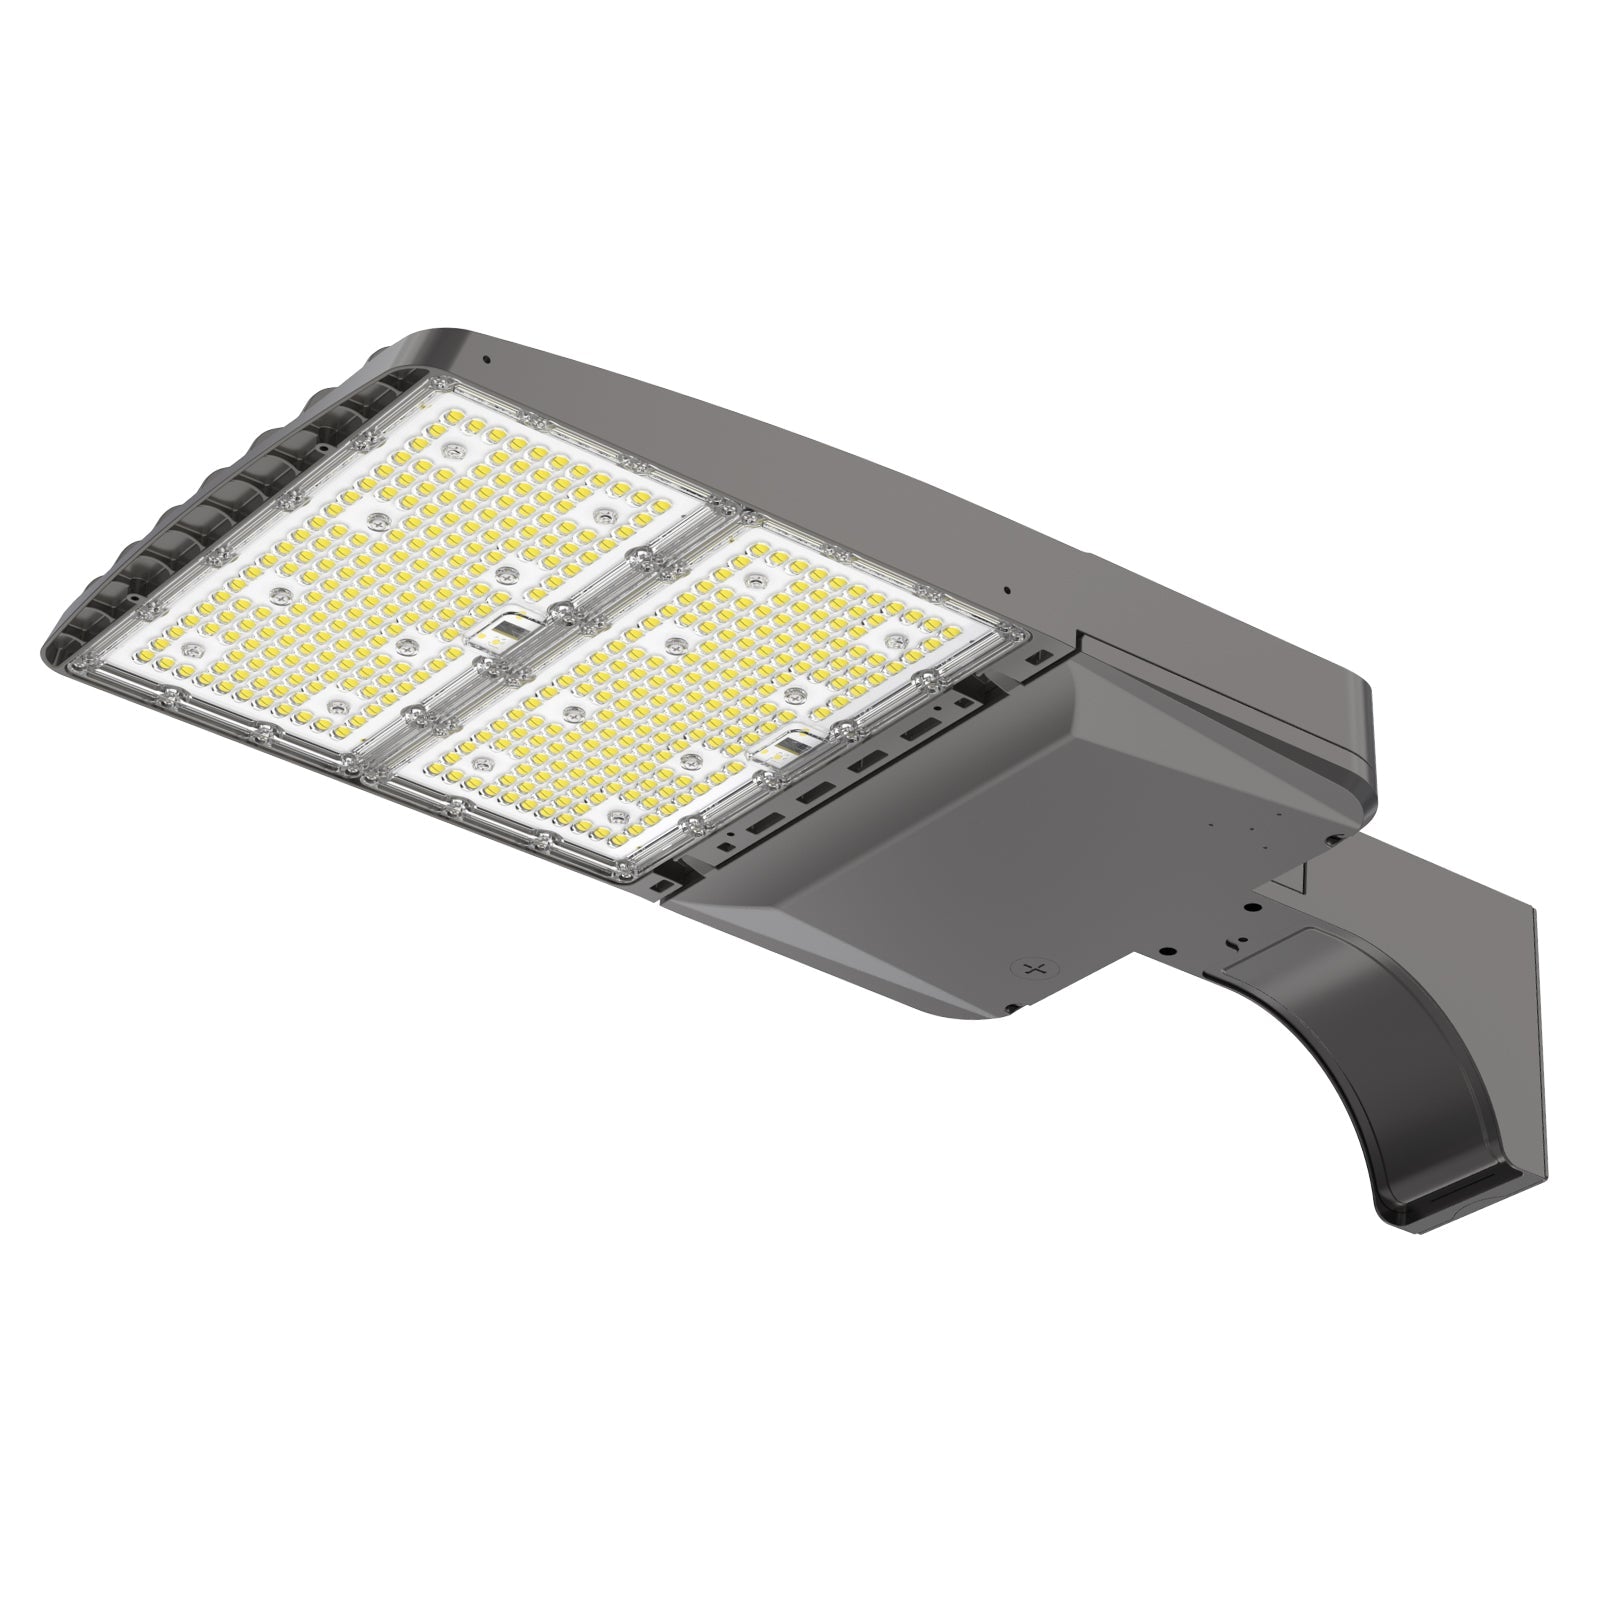 XALH Series Area Light - With Shortcap, AC 120V-277V, 80W-310W, Selectable Wattage